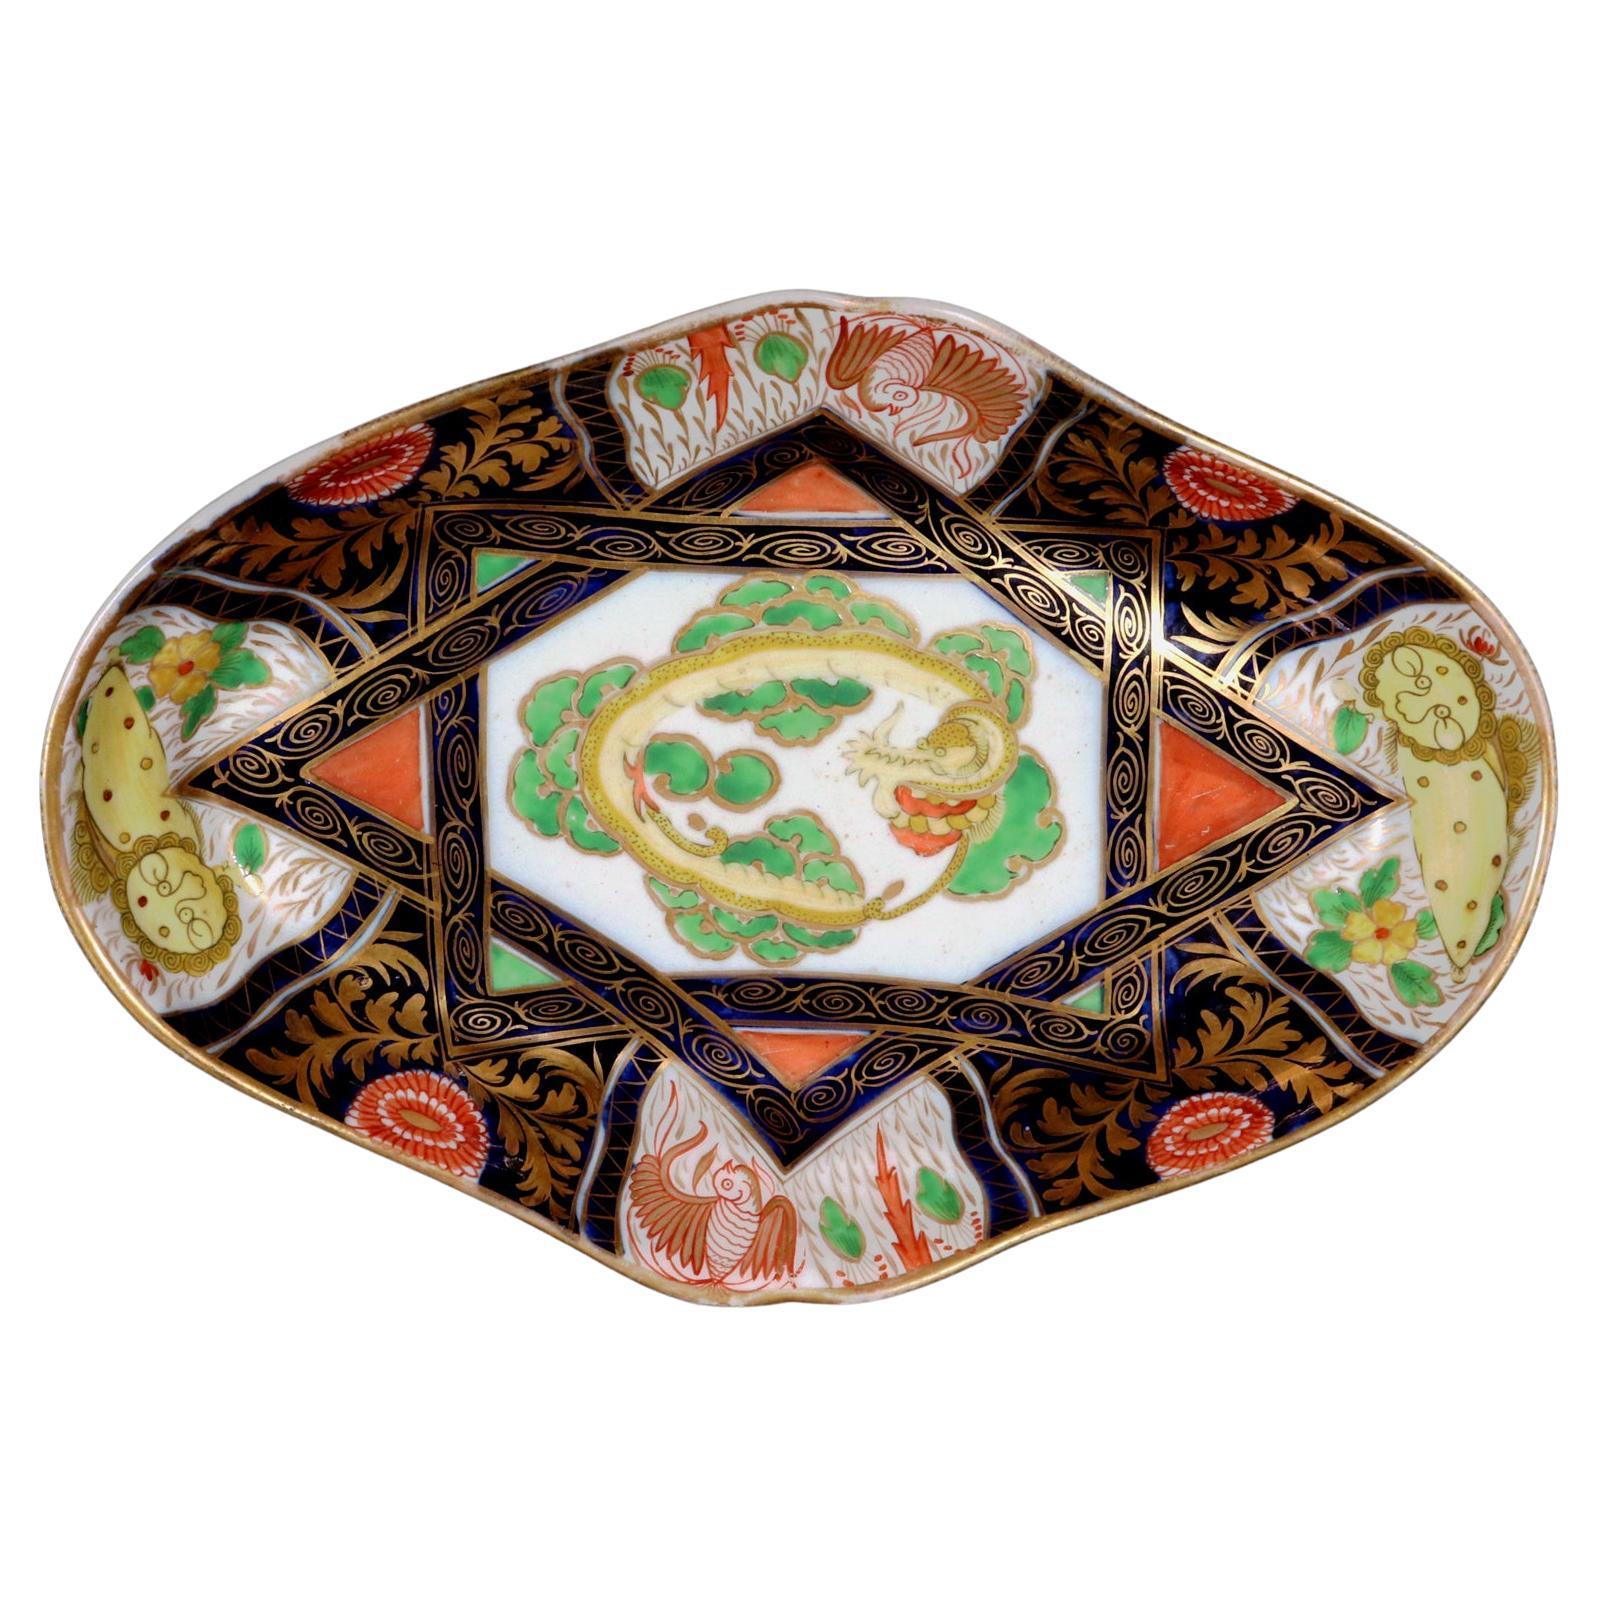 Regency Period Coalport Porcelain Chinoiserie Dish with Yellow Dragon & Lions